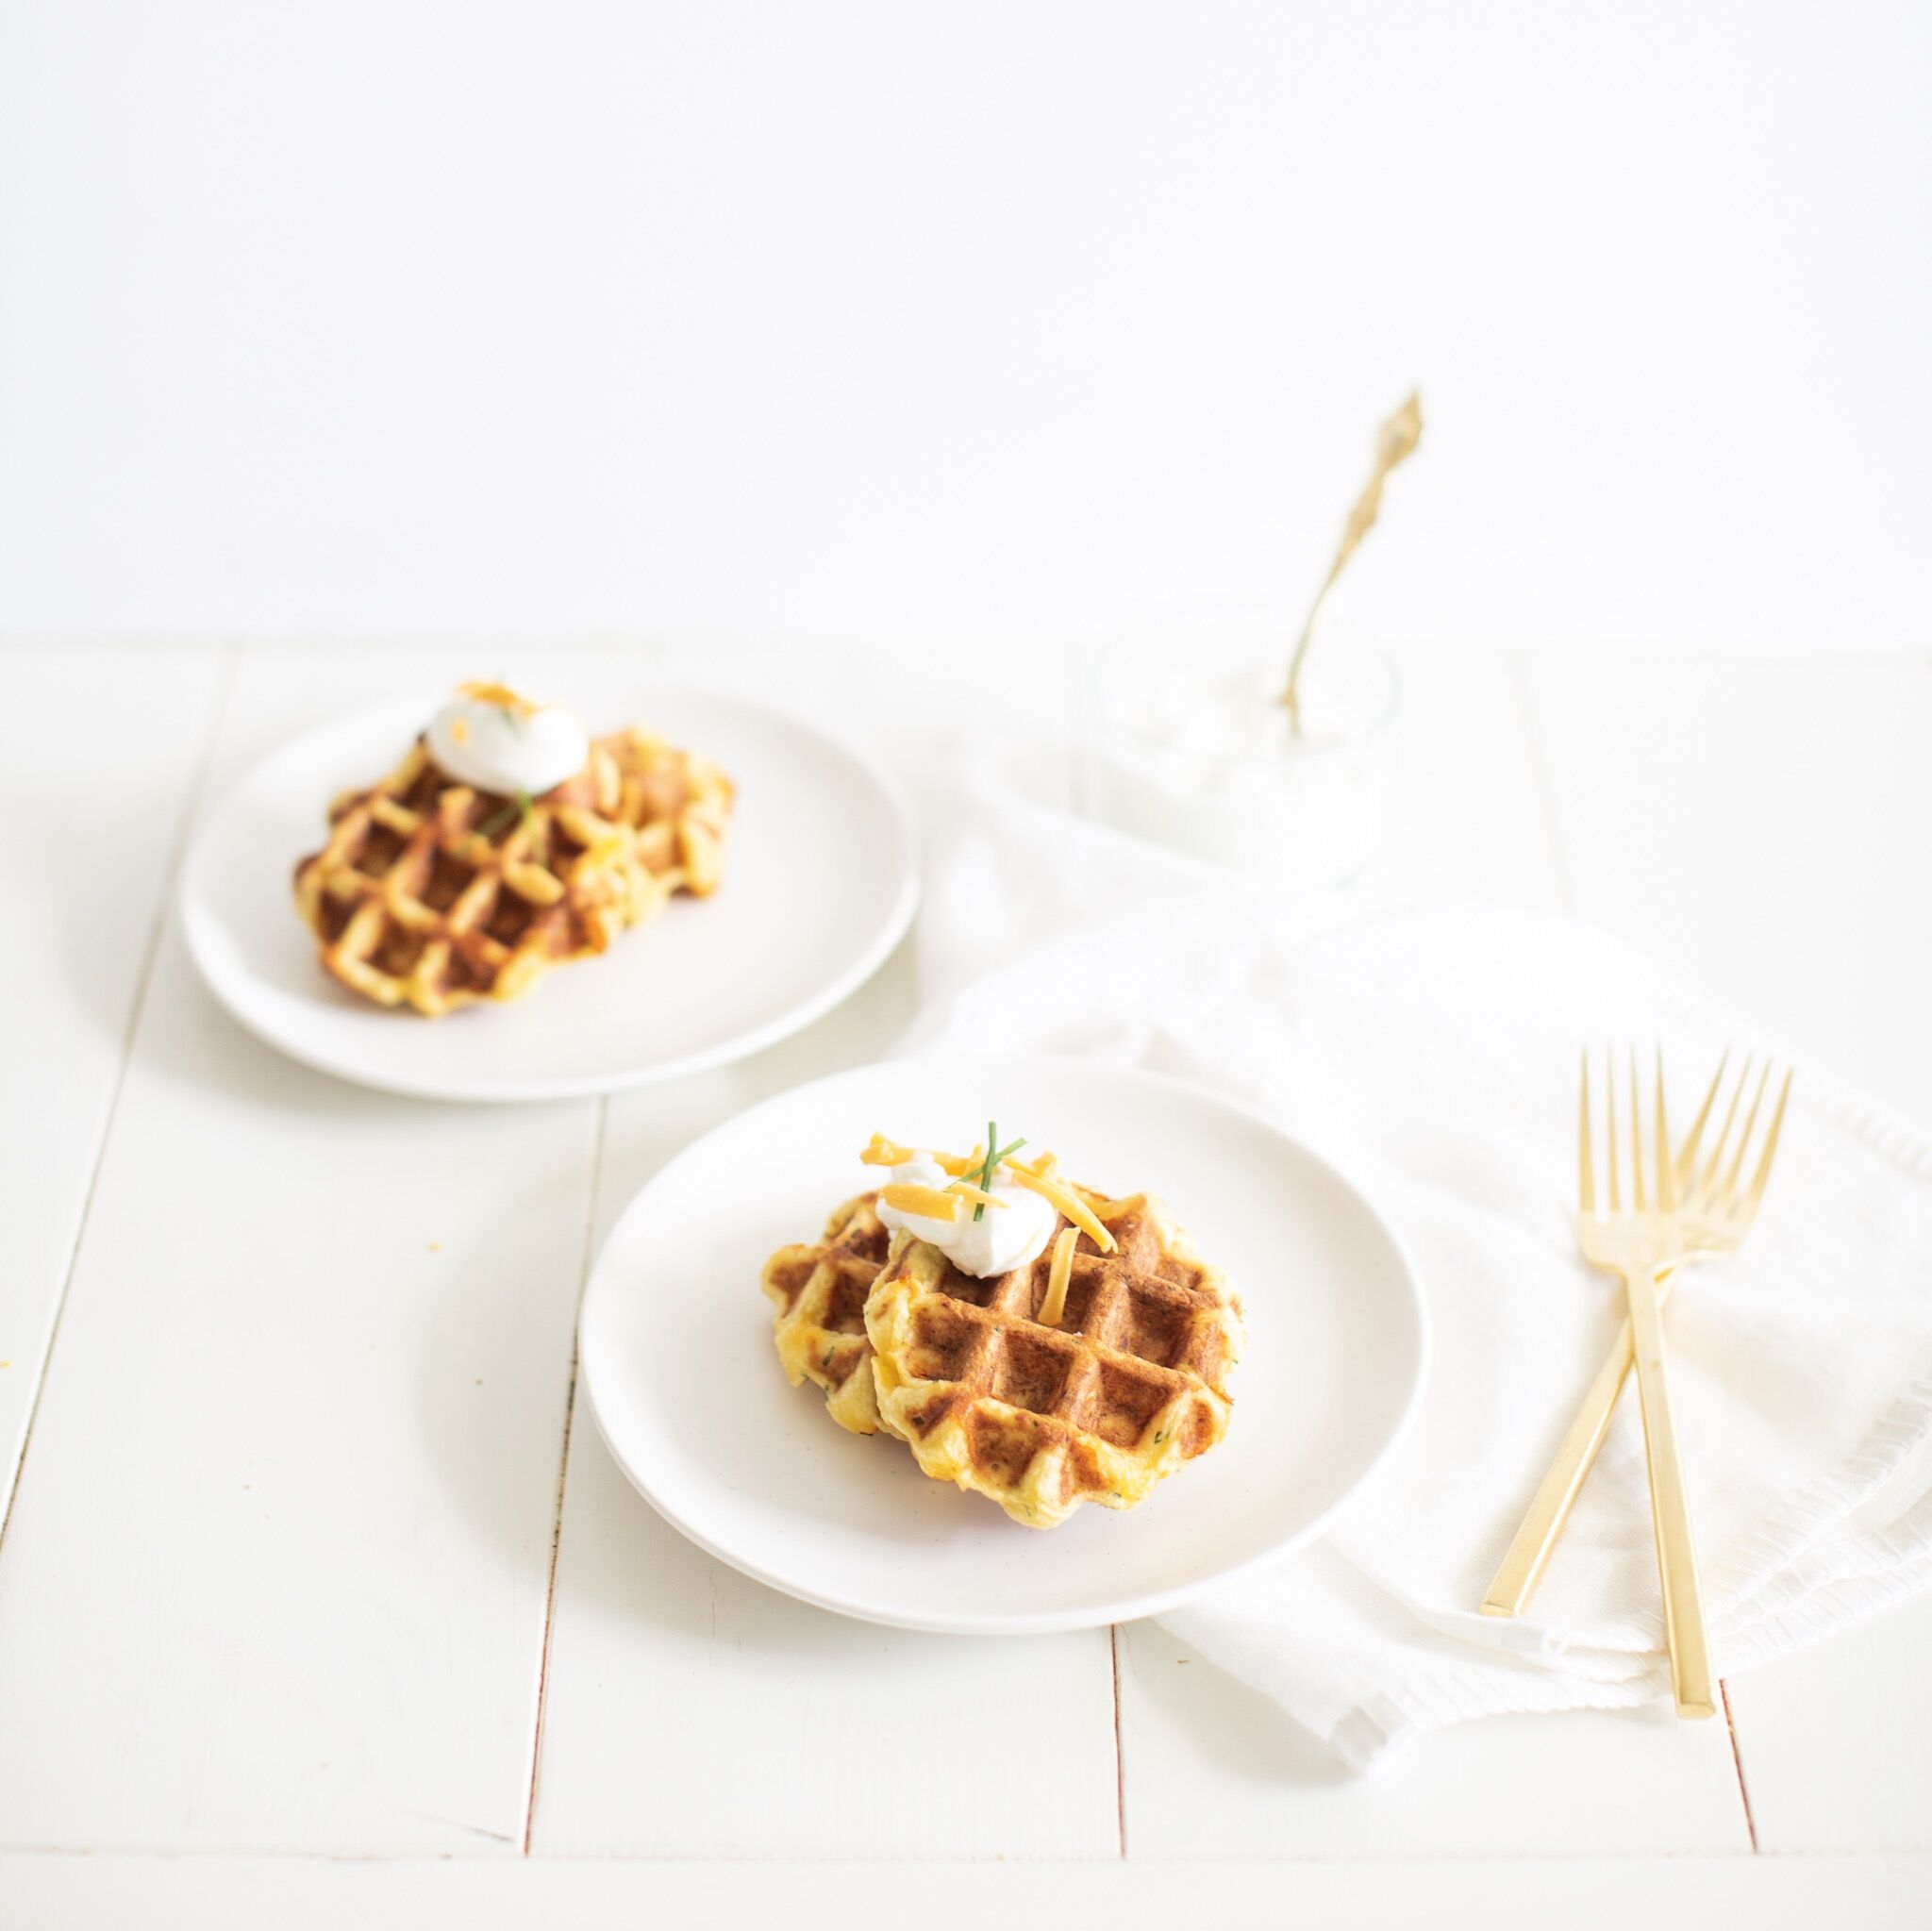 Potato Cheddar Chive Waffles with a vegan option: such a great way to use up leftover mashed potatoes after the holidays!